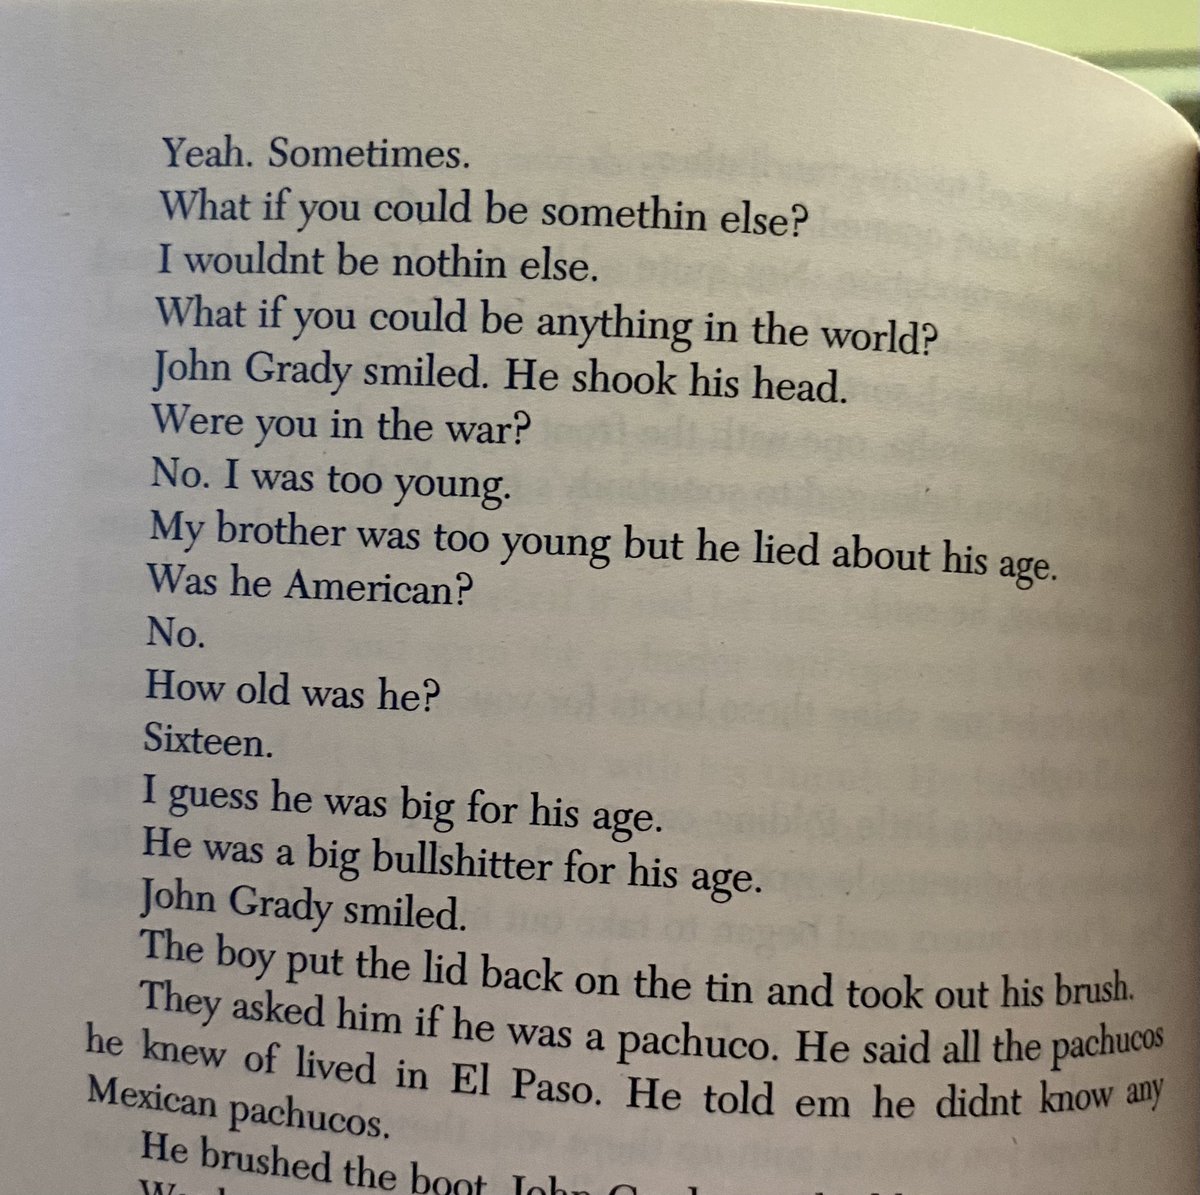 One of the great things about Cormac McCarthy is the reality of the dialogue.